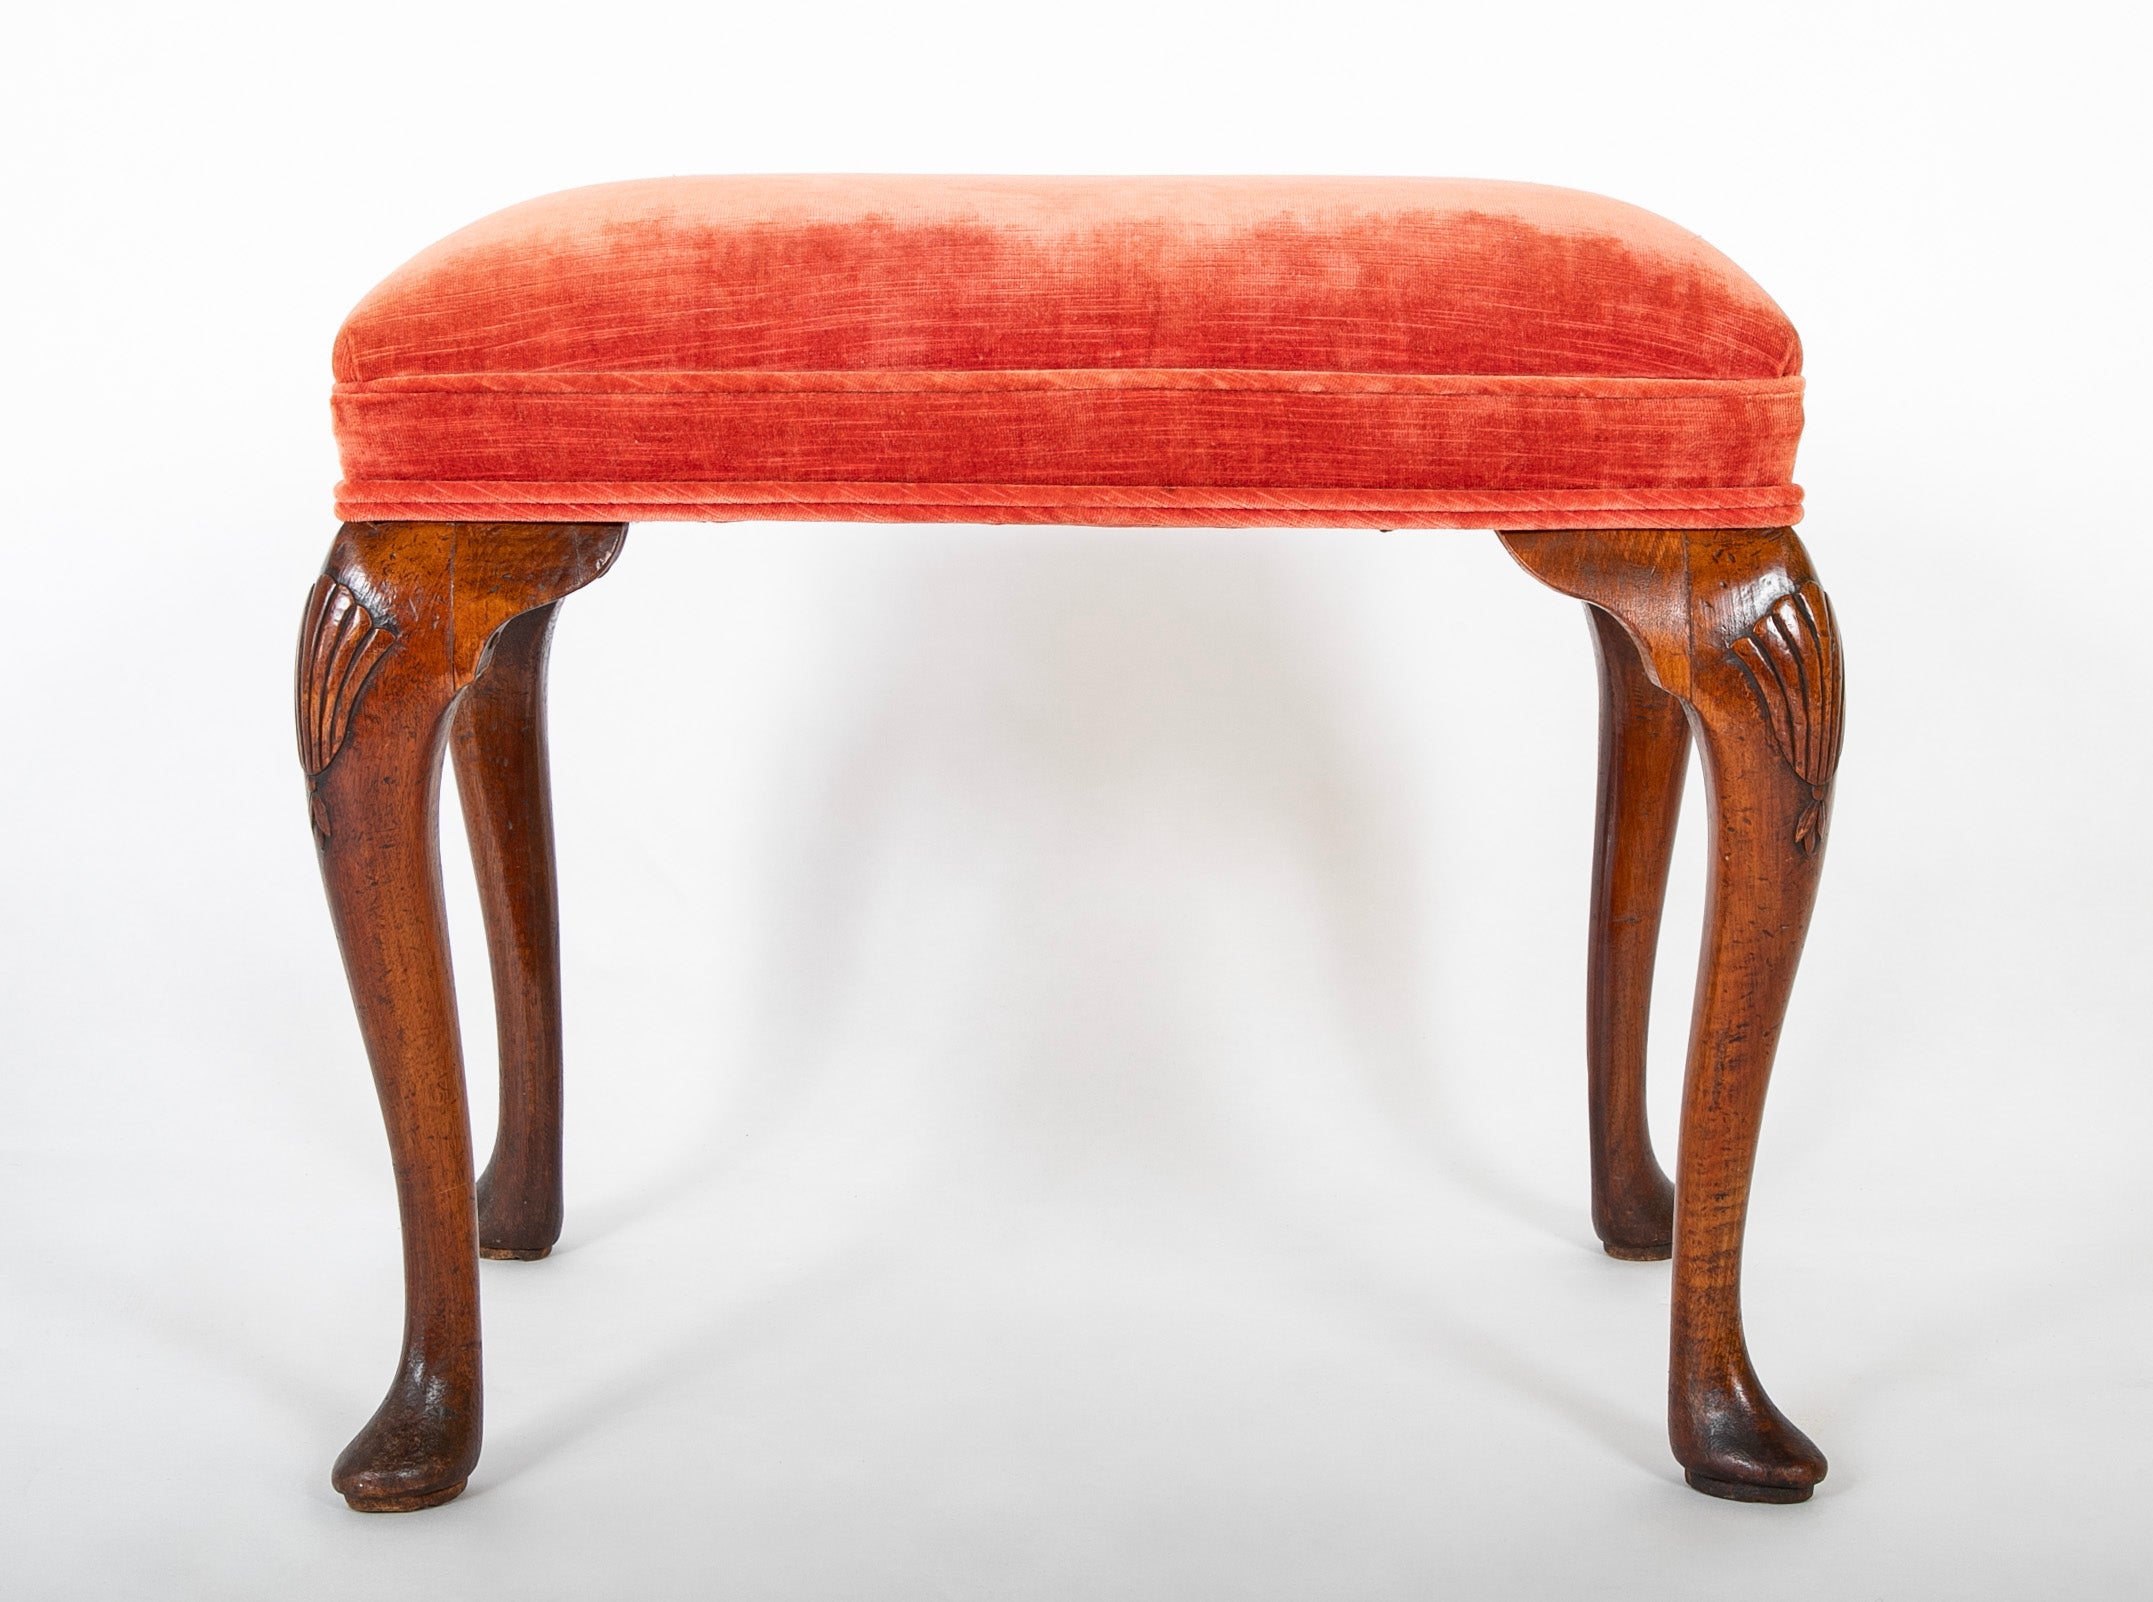 A Late 19th Century English Queen Anne Style Bench